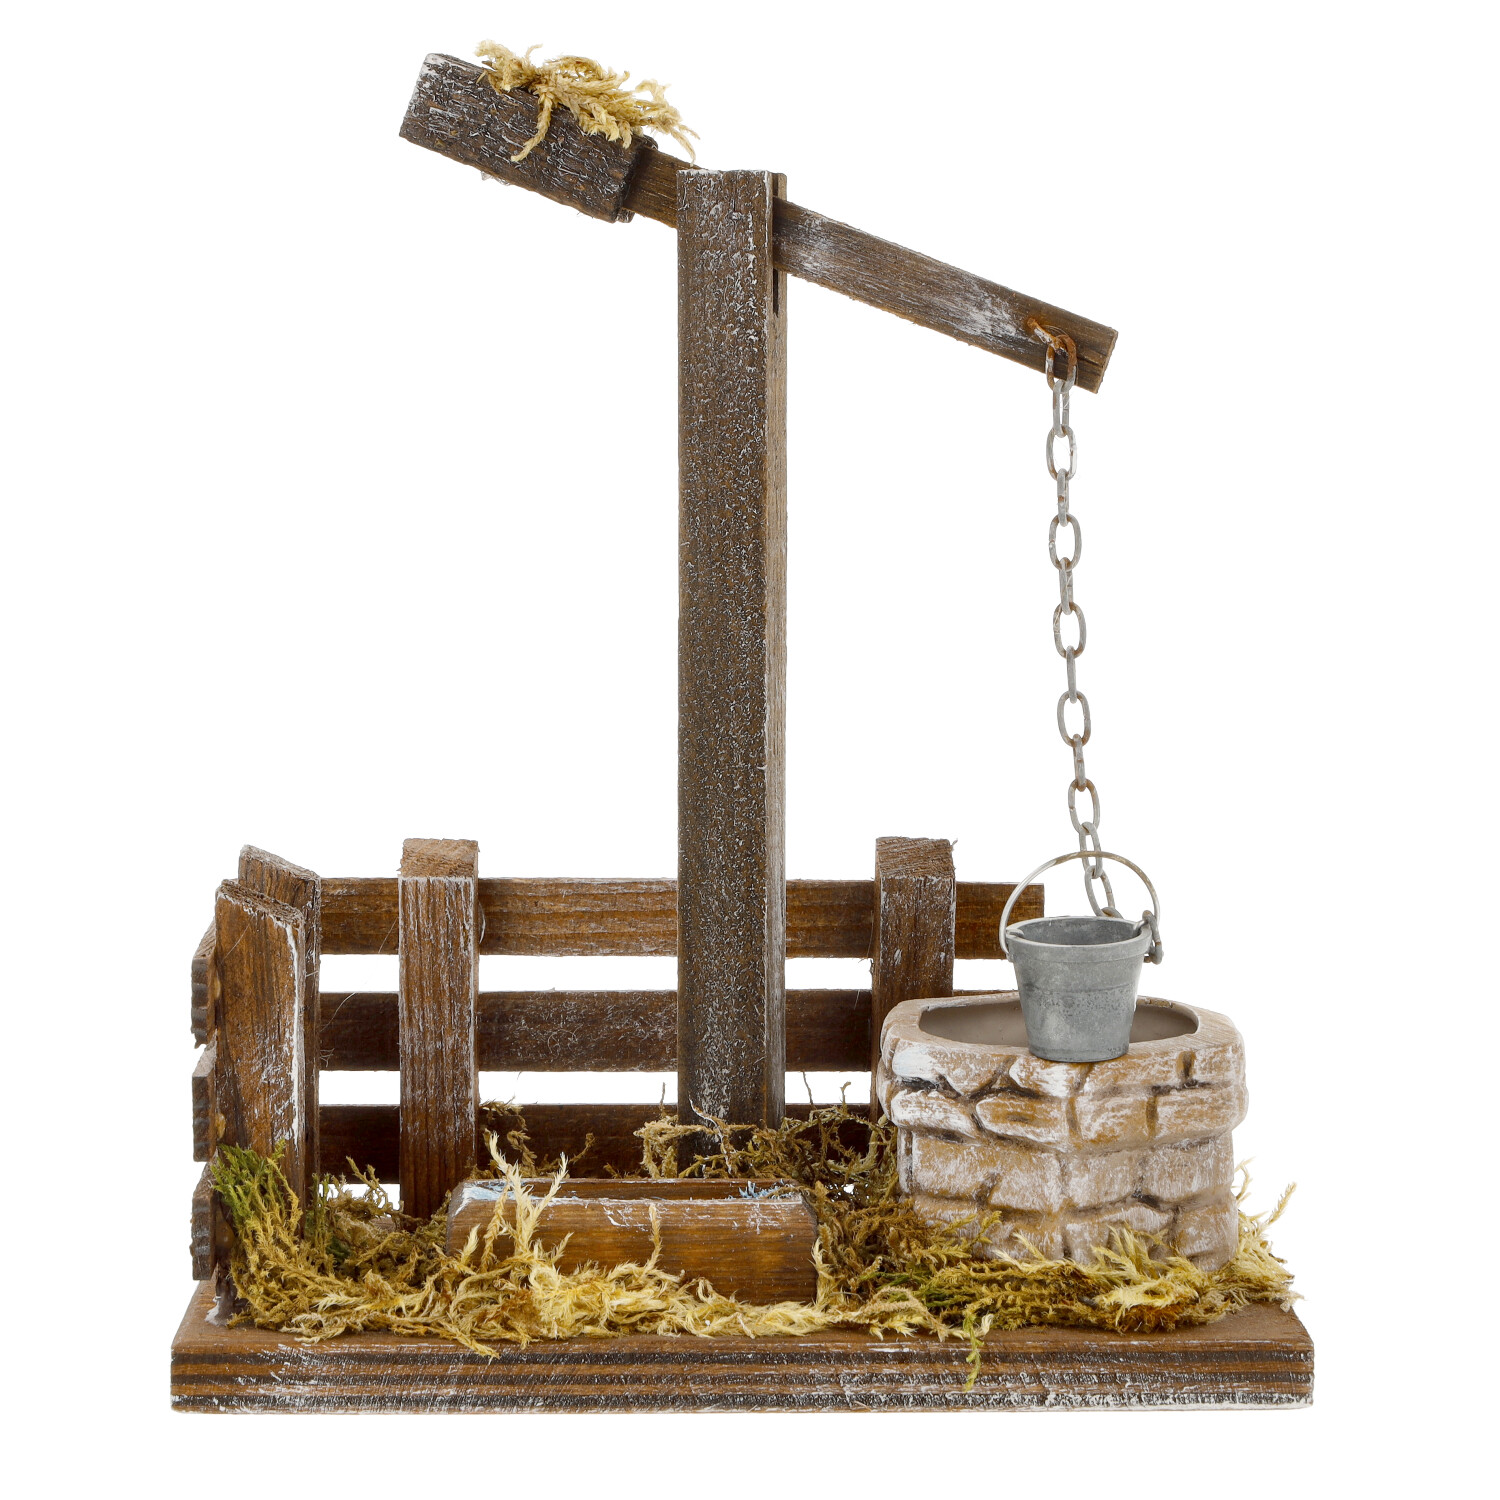 Well with feeder - for Marolin Nativity figures - made in Germany